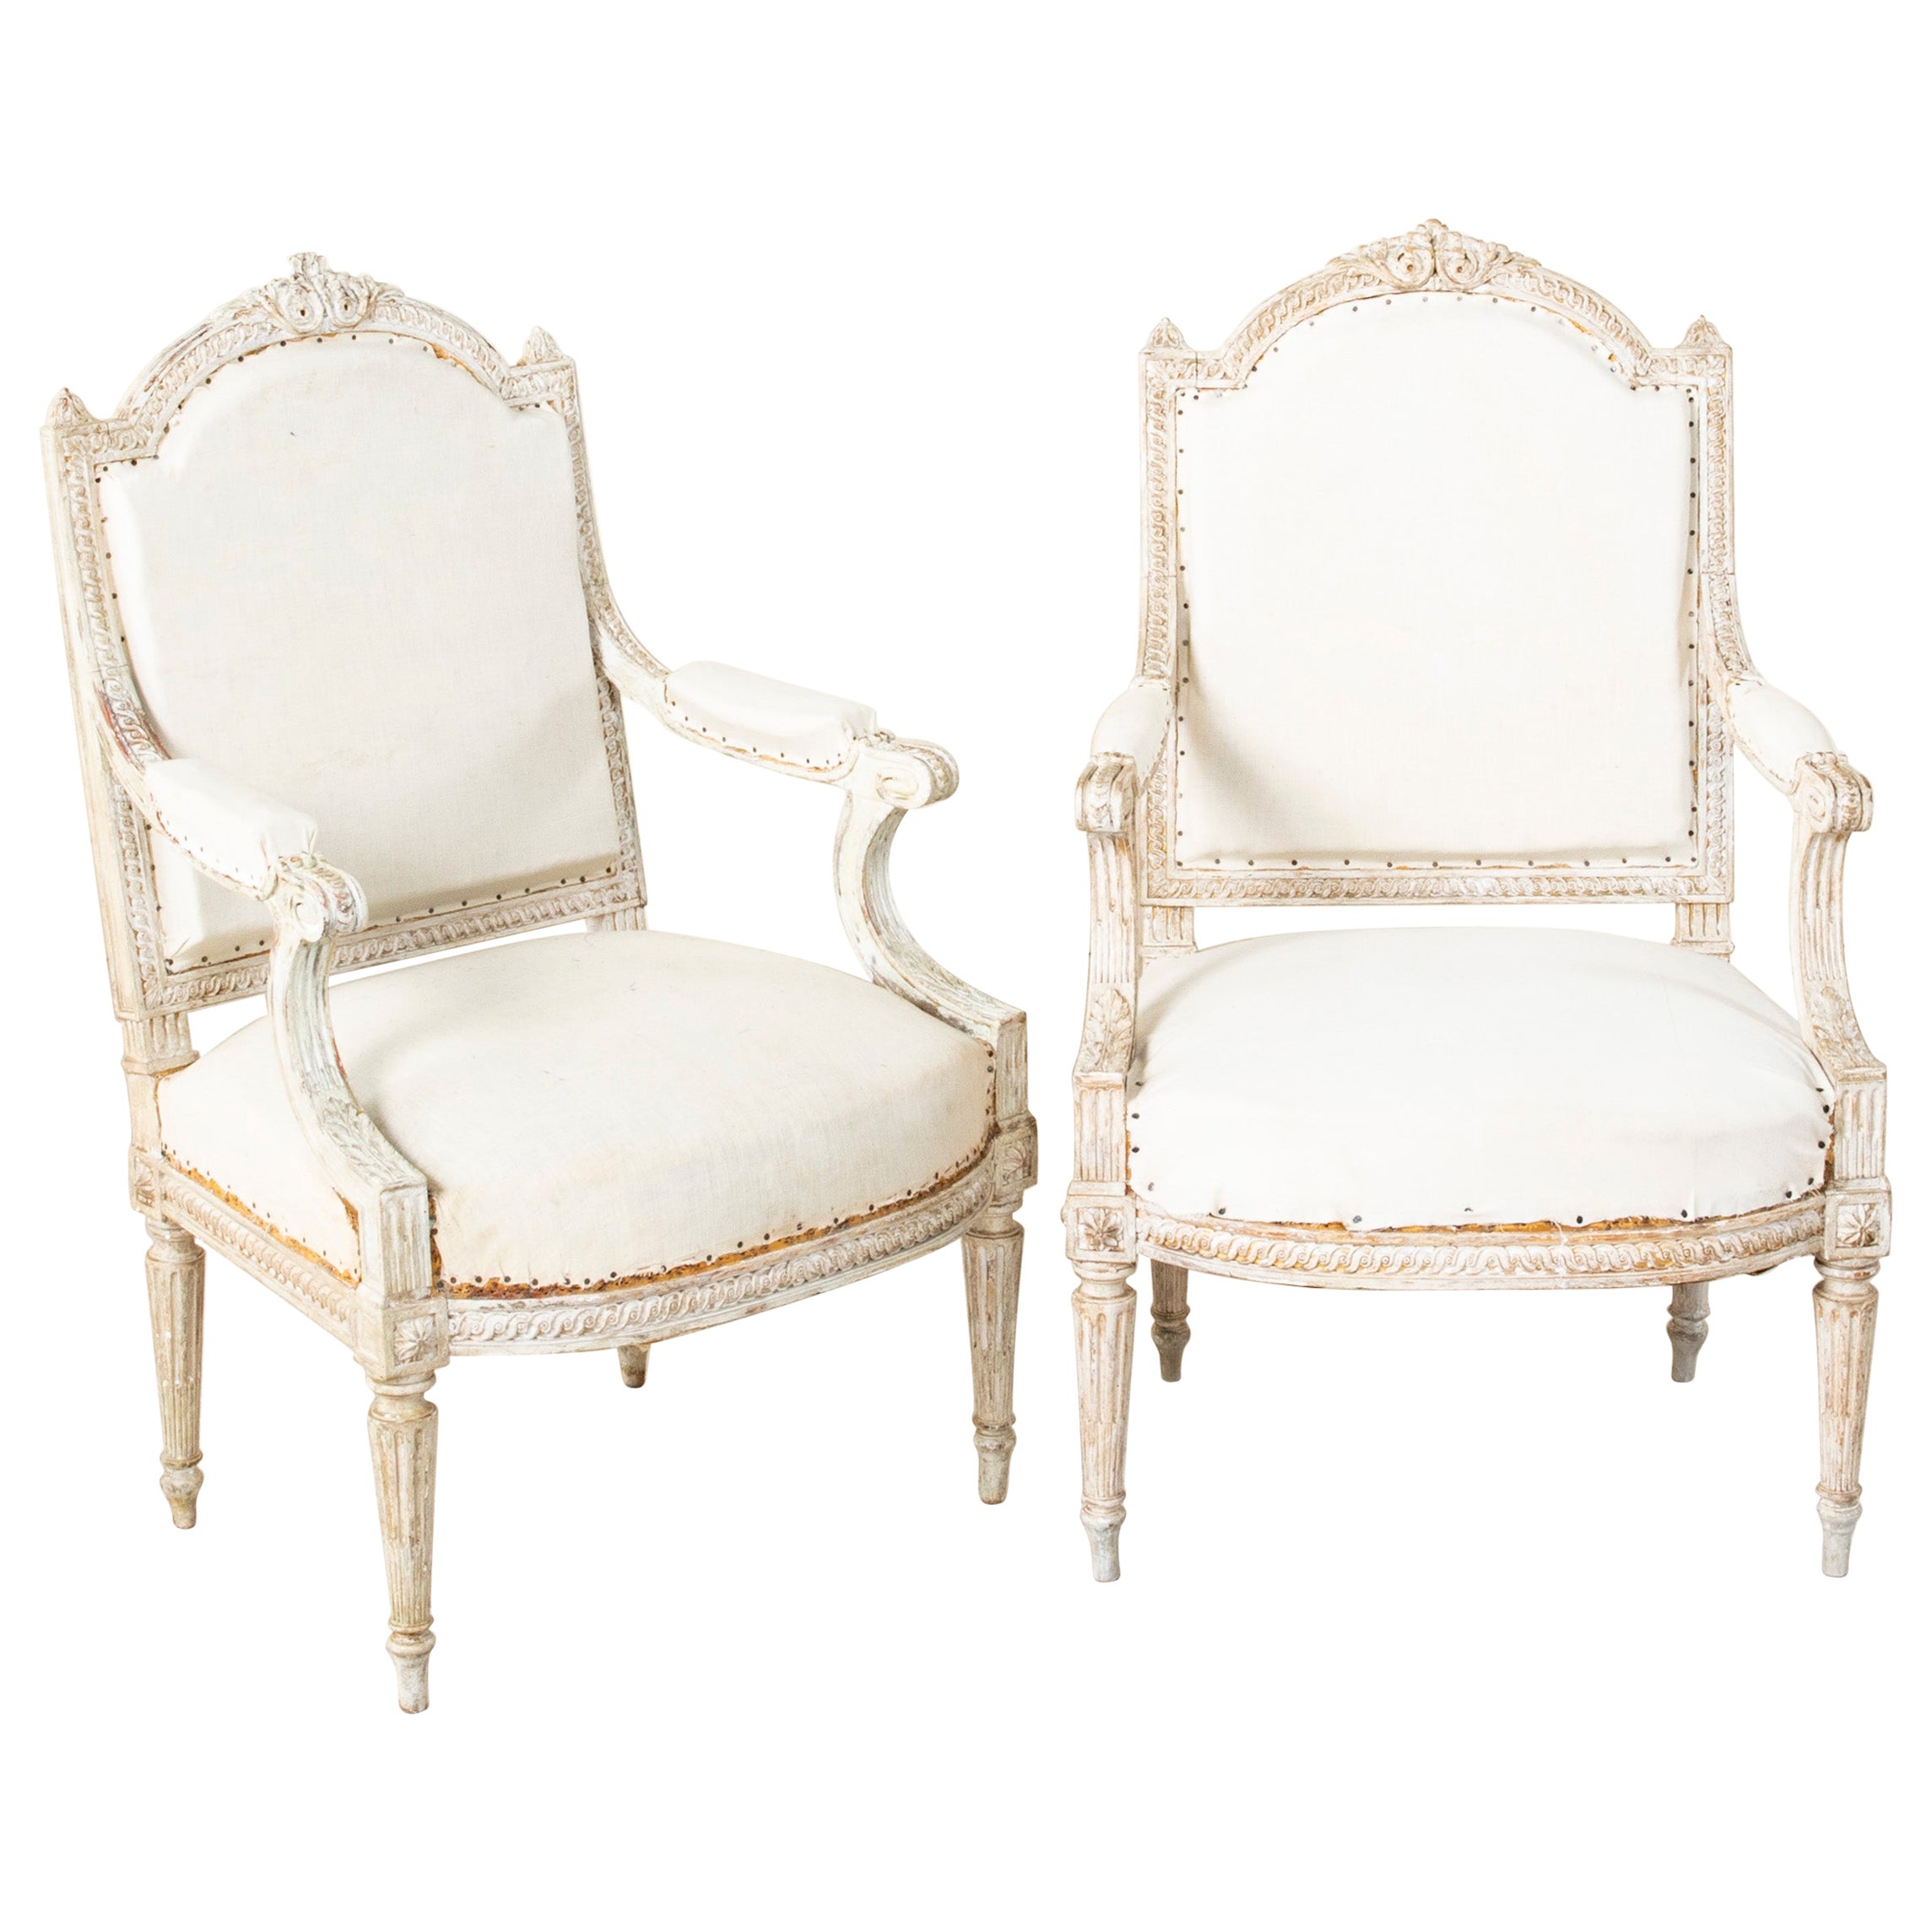 Mid 19th Century French Louis XVI Style Painted Armchairs or Bergeres For Sale